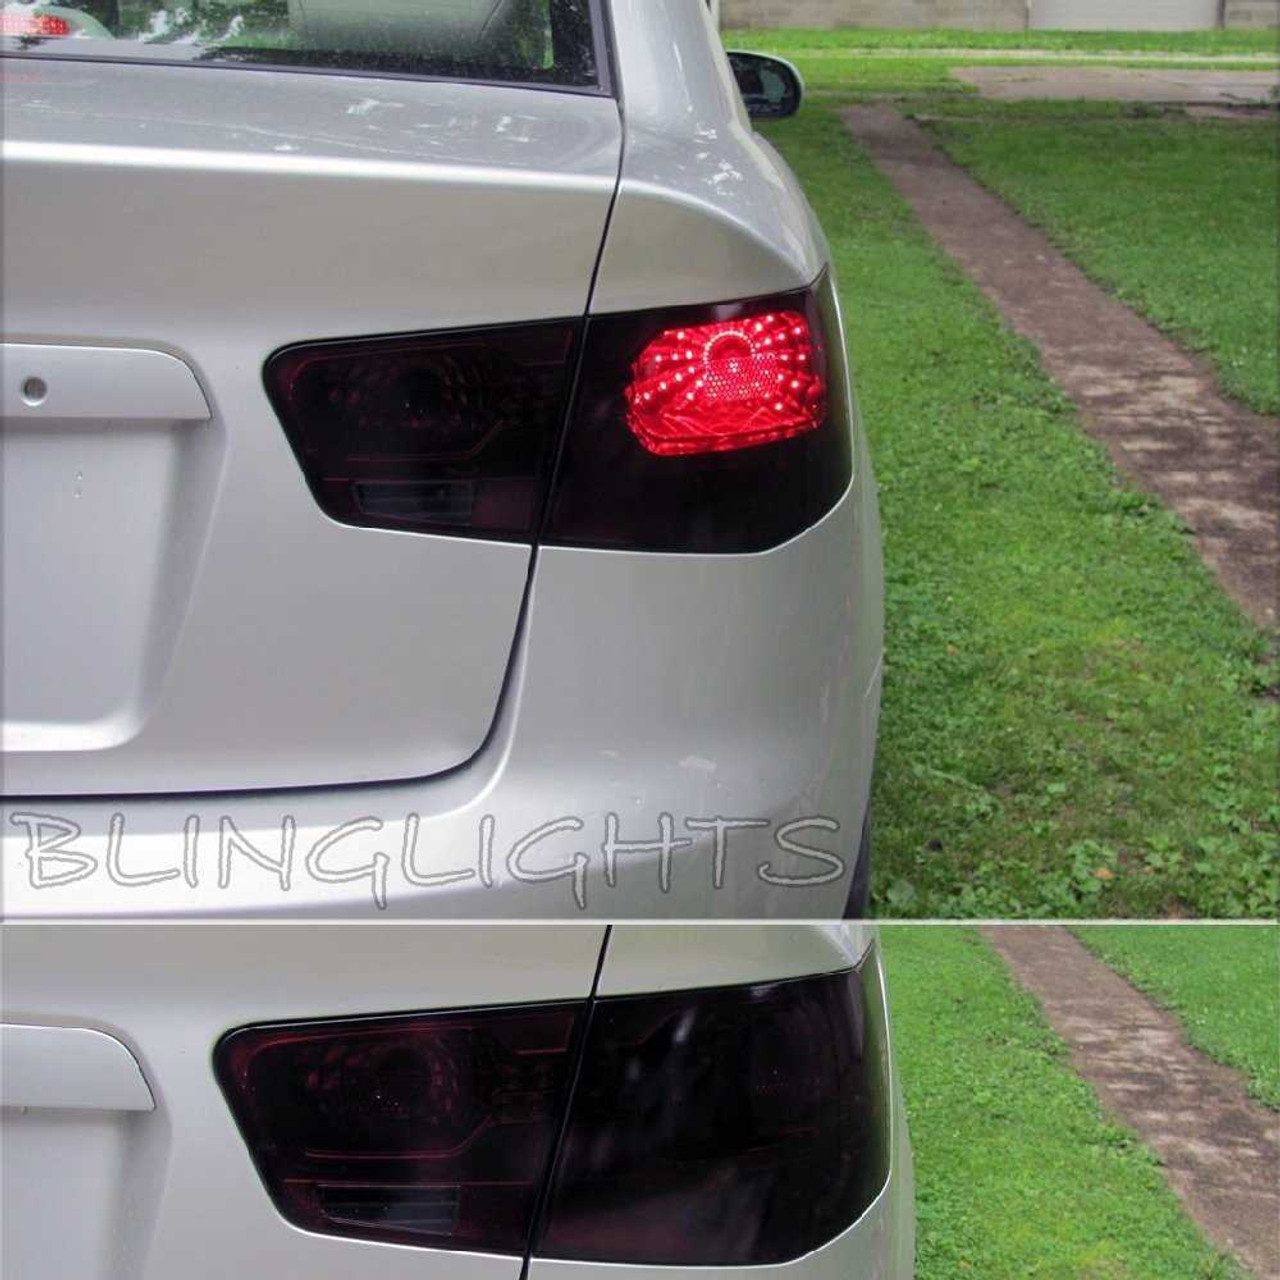 Kia Cerato Tinted Smoked Tail Lamps Lights Overlay Film Protection